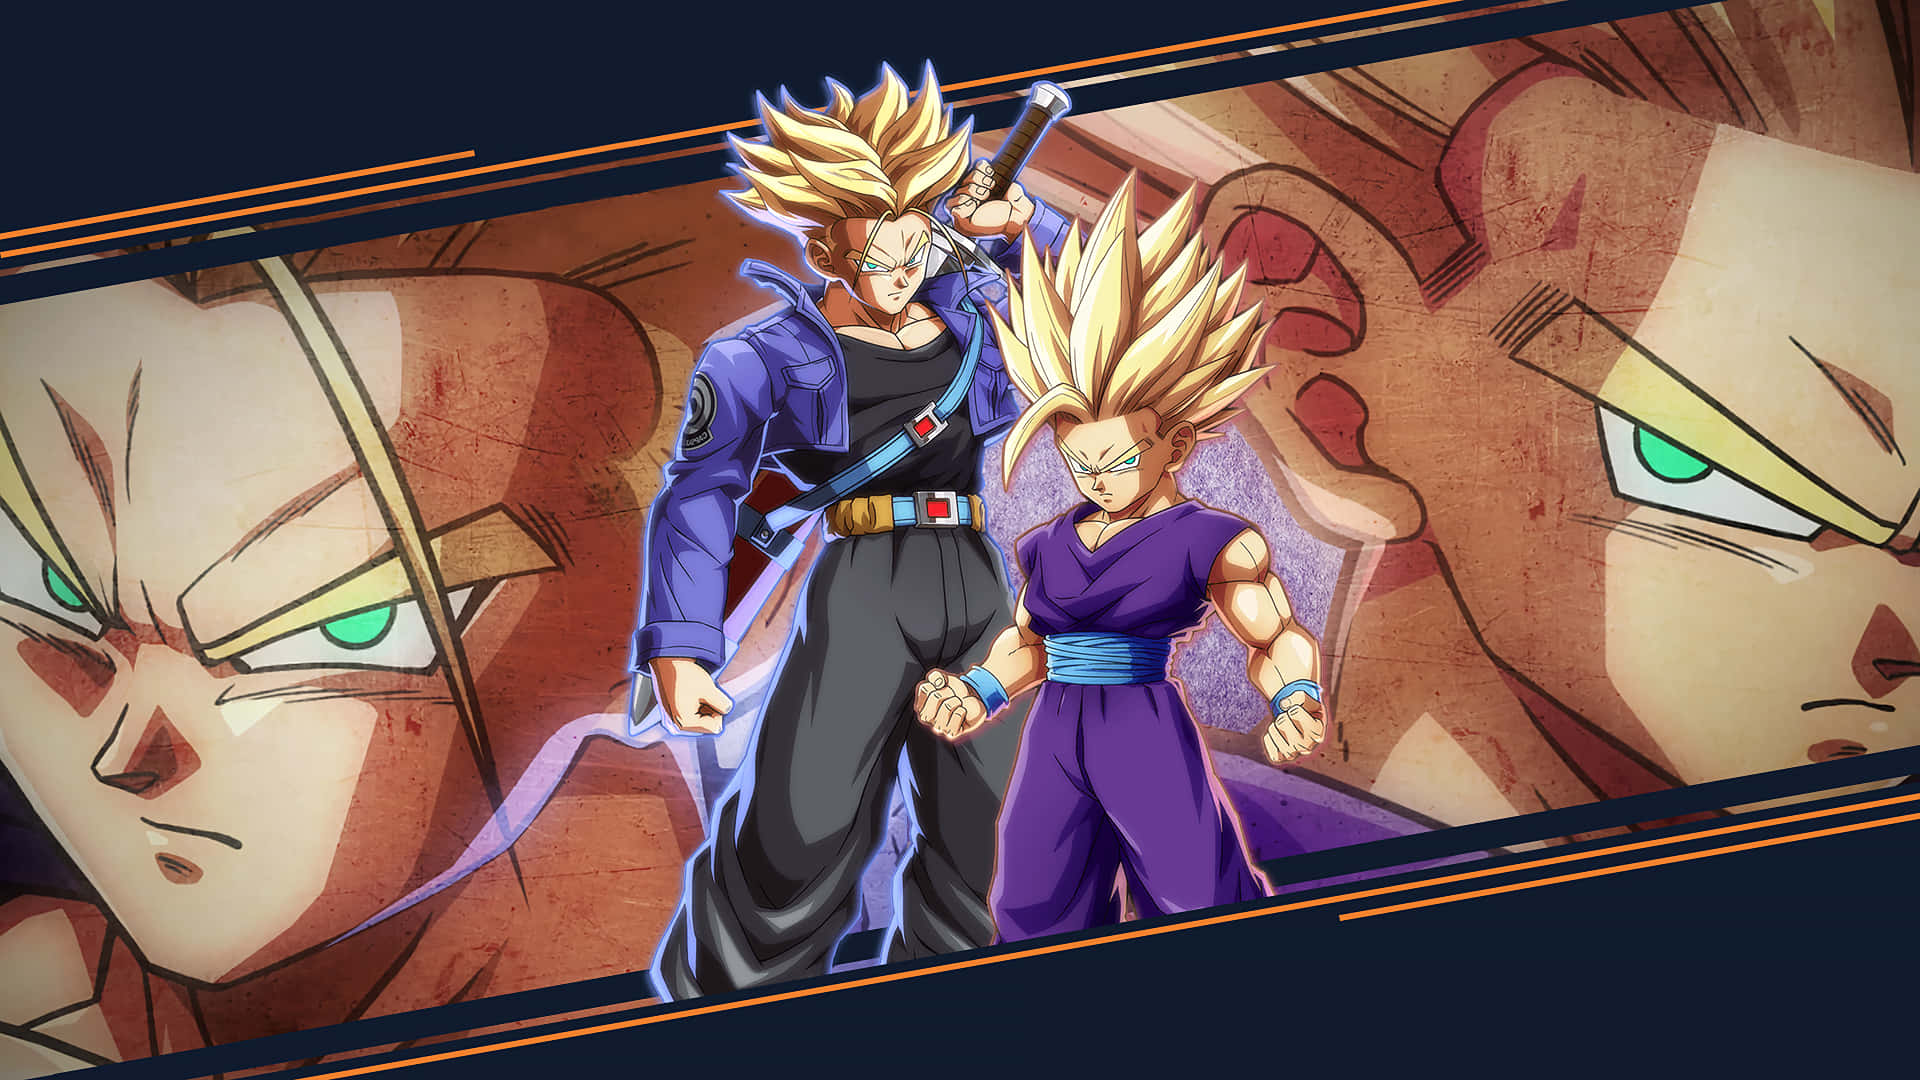 Trunks Fights To Take On The Opponent Wallpaper